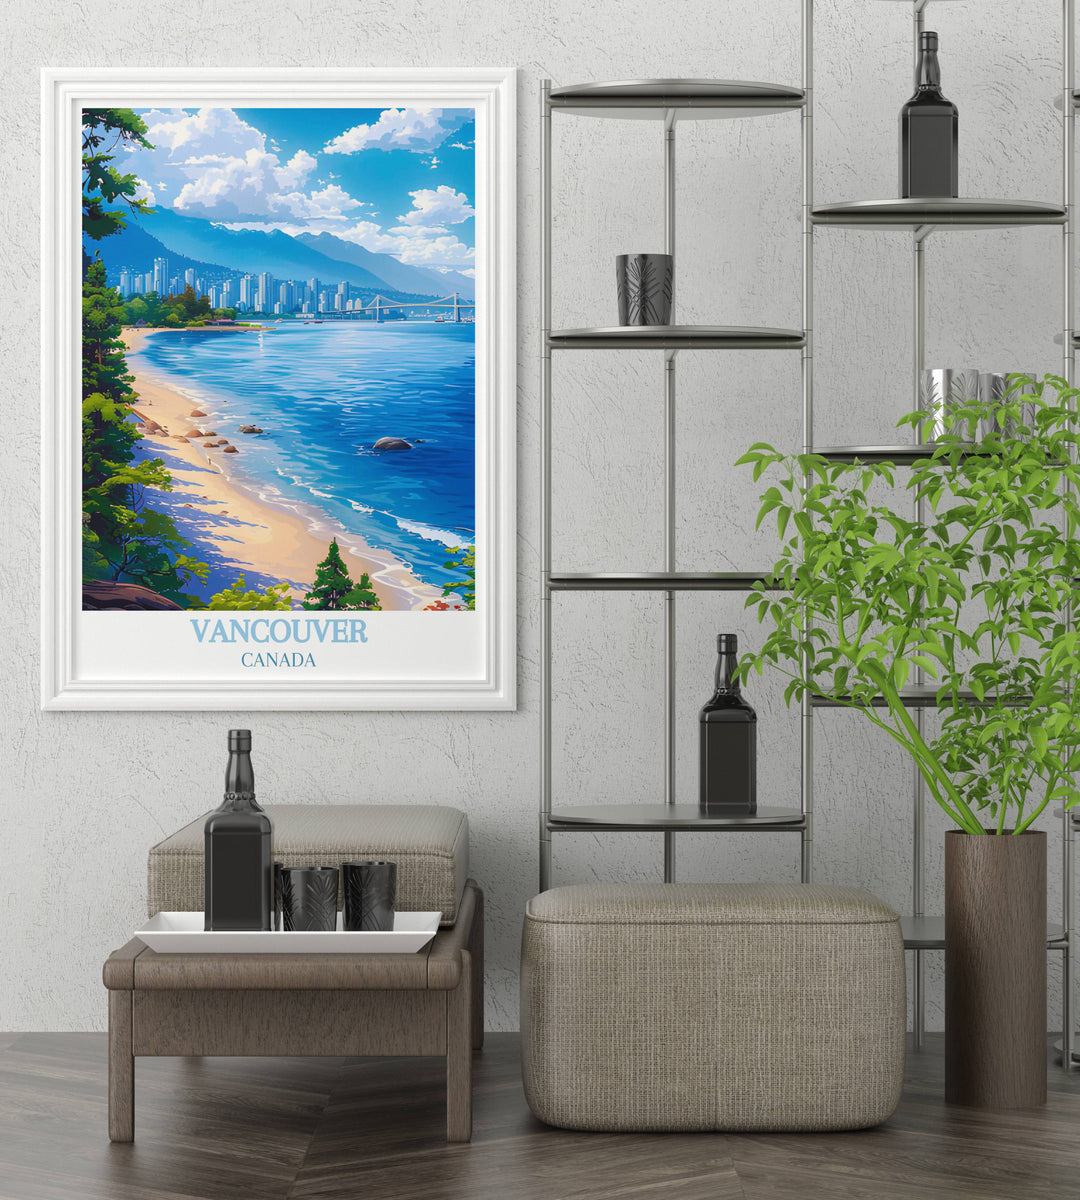 Stunning wall art of Vancouver showcasing its blend of urban sophistication and natural beauty. Ideal for living rooms and offices.